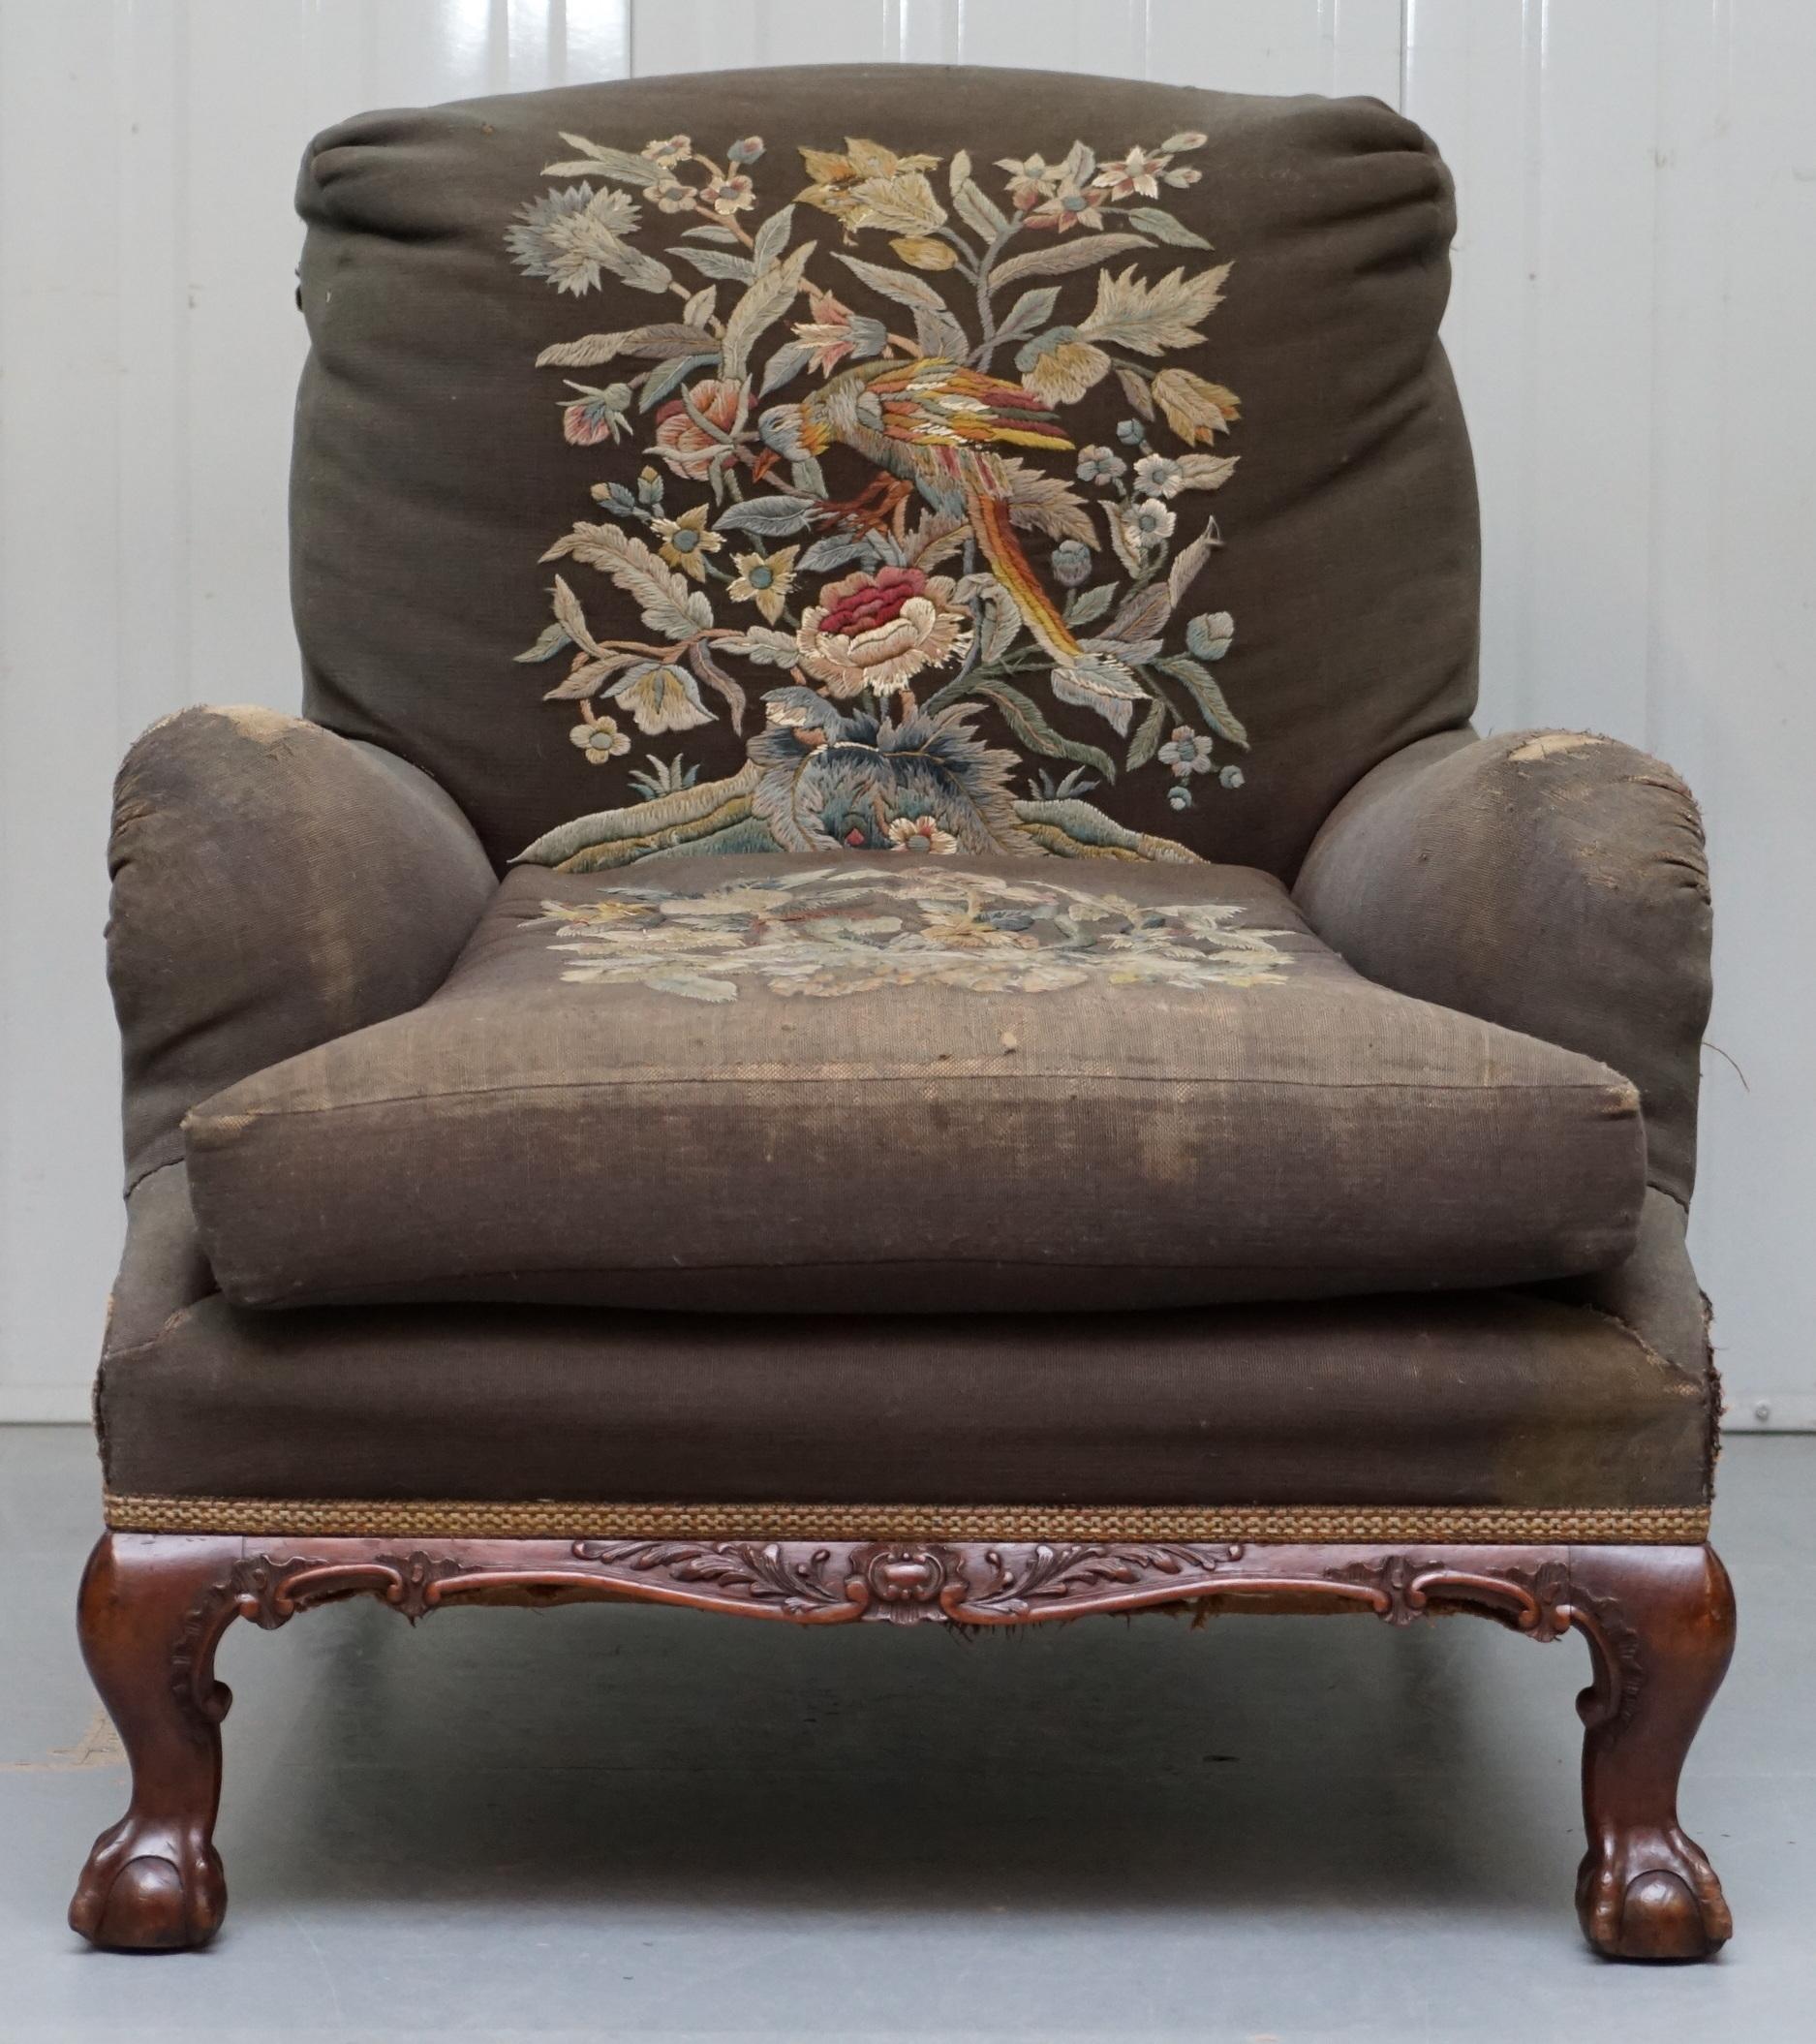 We are delighted to offer for sale this stunning exceptionally rare original Victorian walnut framed Claw & Ball feet Howard & Son’s Berners Street stamped Grafton model long platform armchair with original Embroidered upholstery 

This chair is